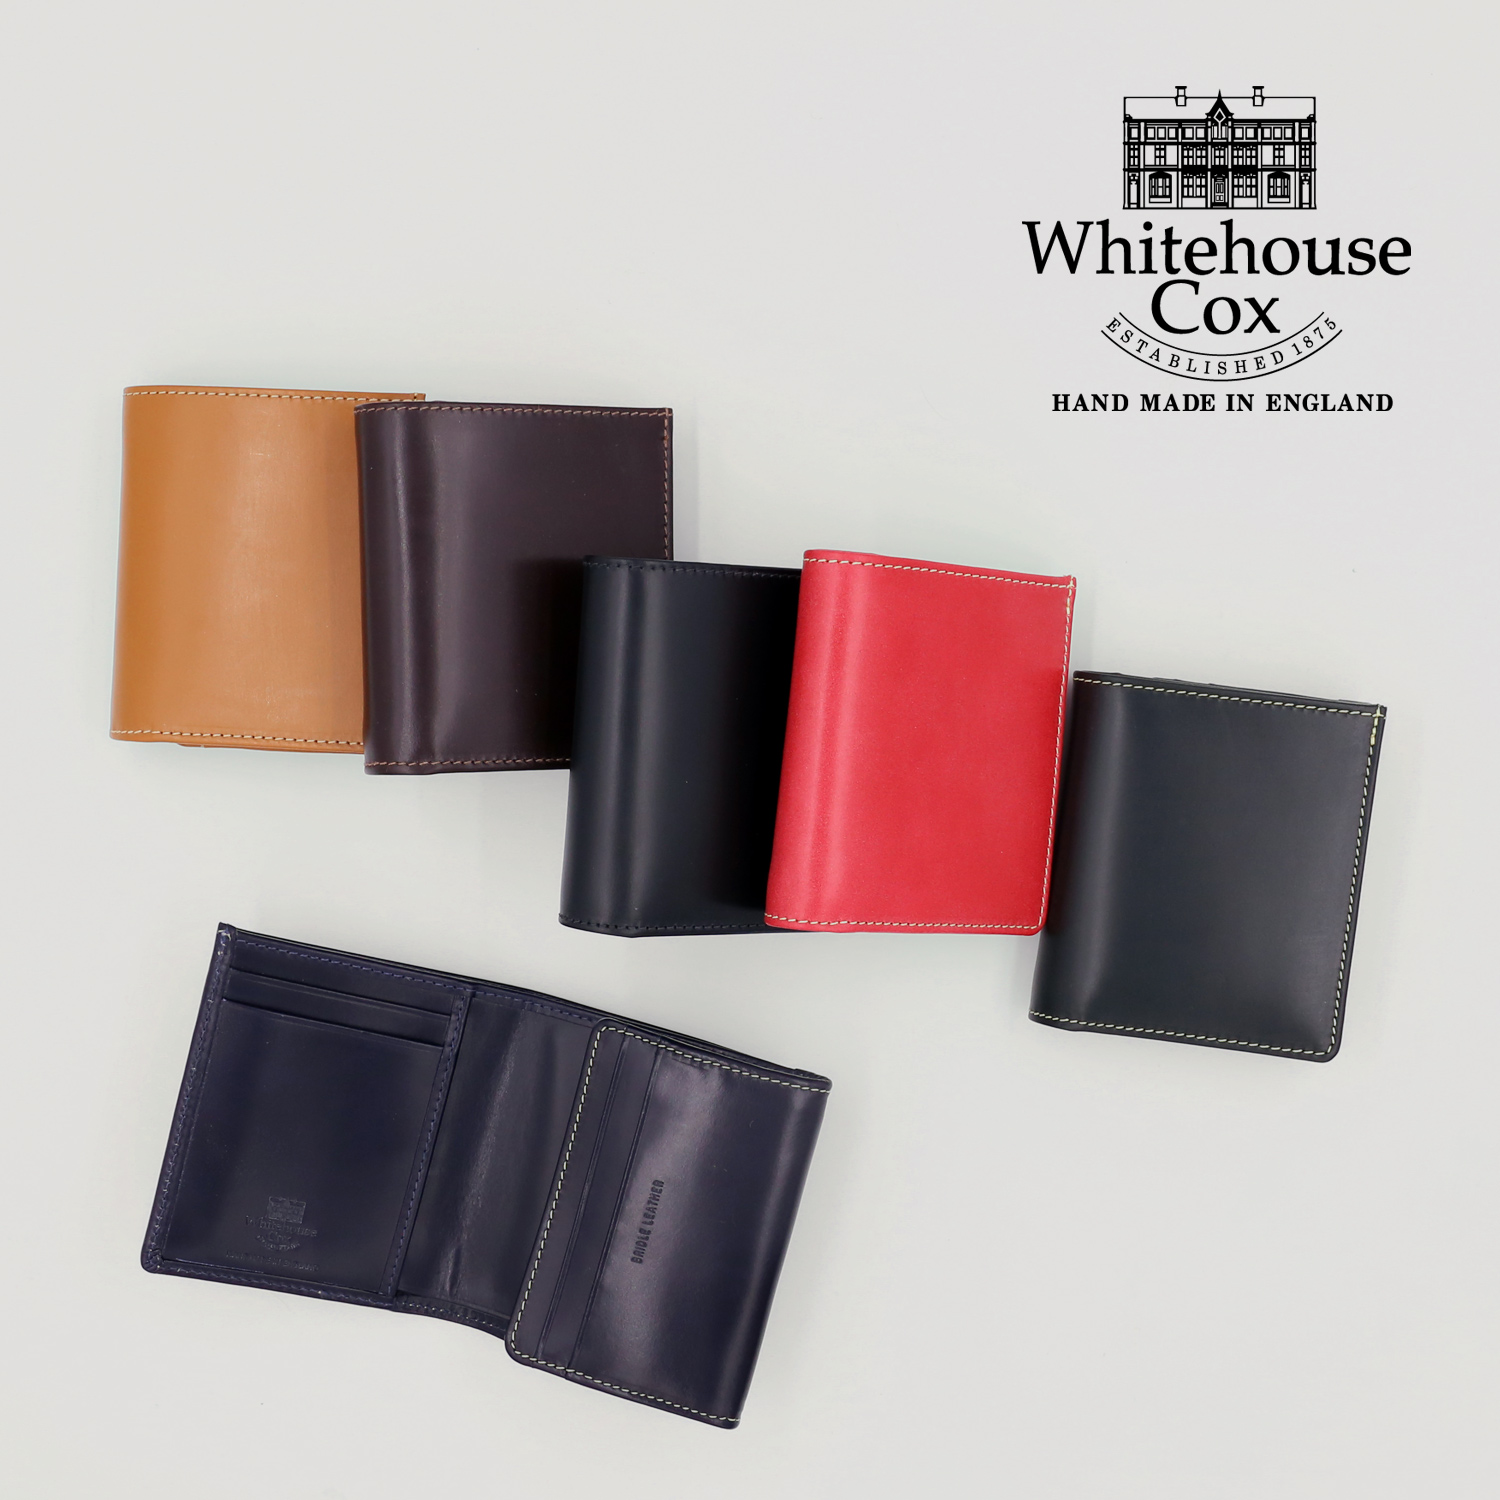 Whitehouse Cox BRIDLE LEATHER COLLECTION New Stock